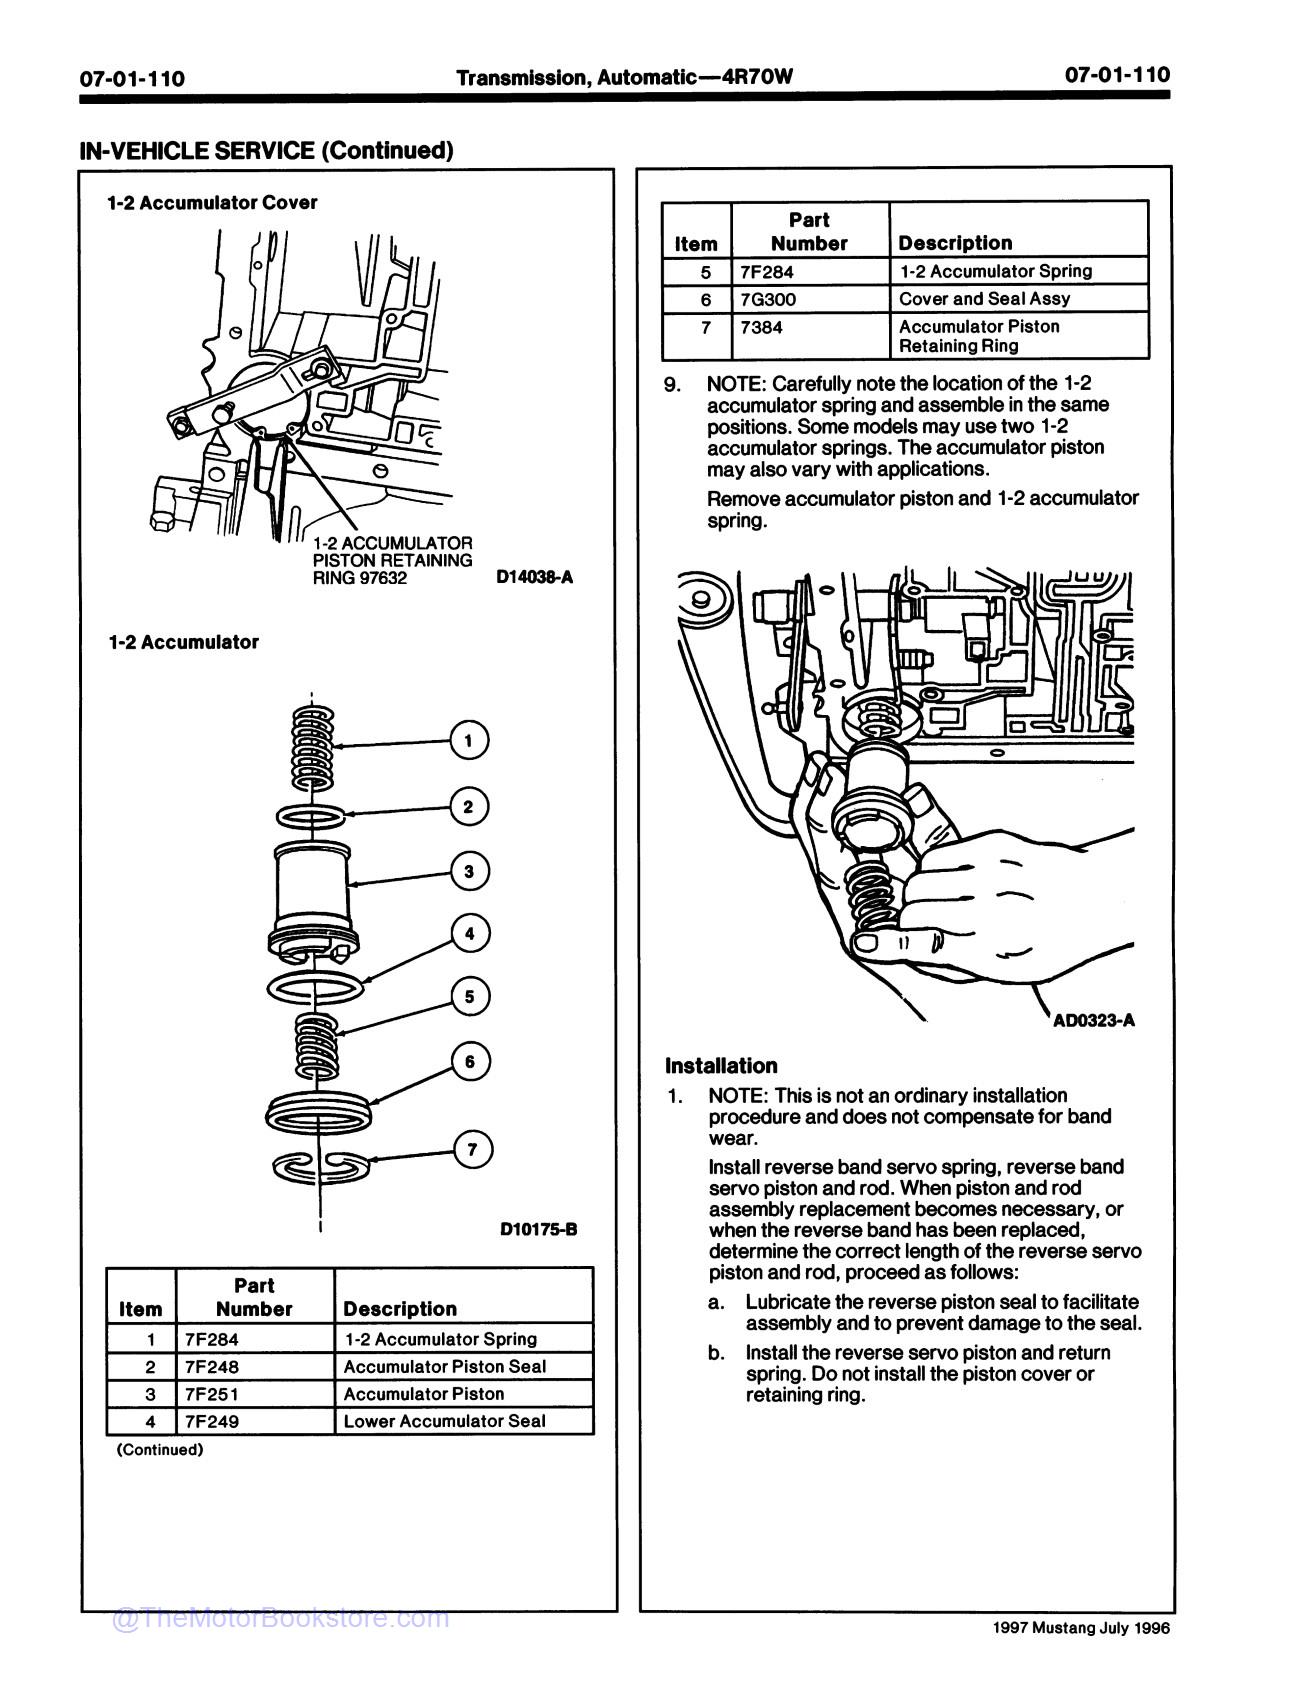 1997 Ford Mustang Service Manual - Sample Page 2